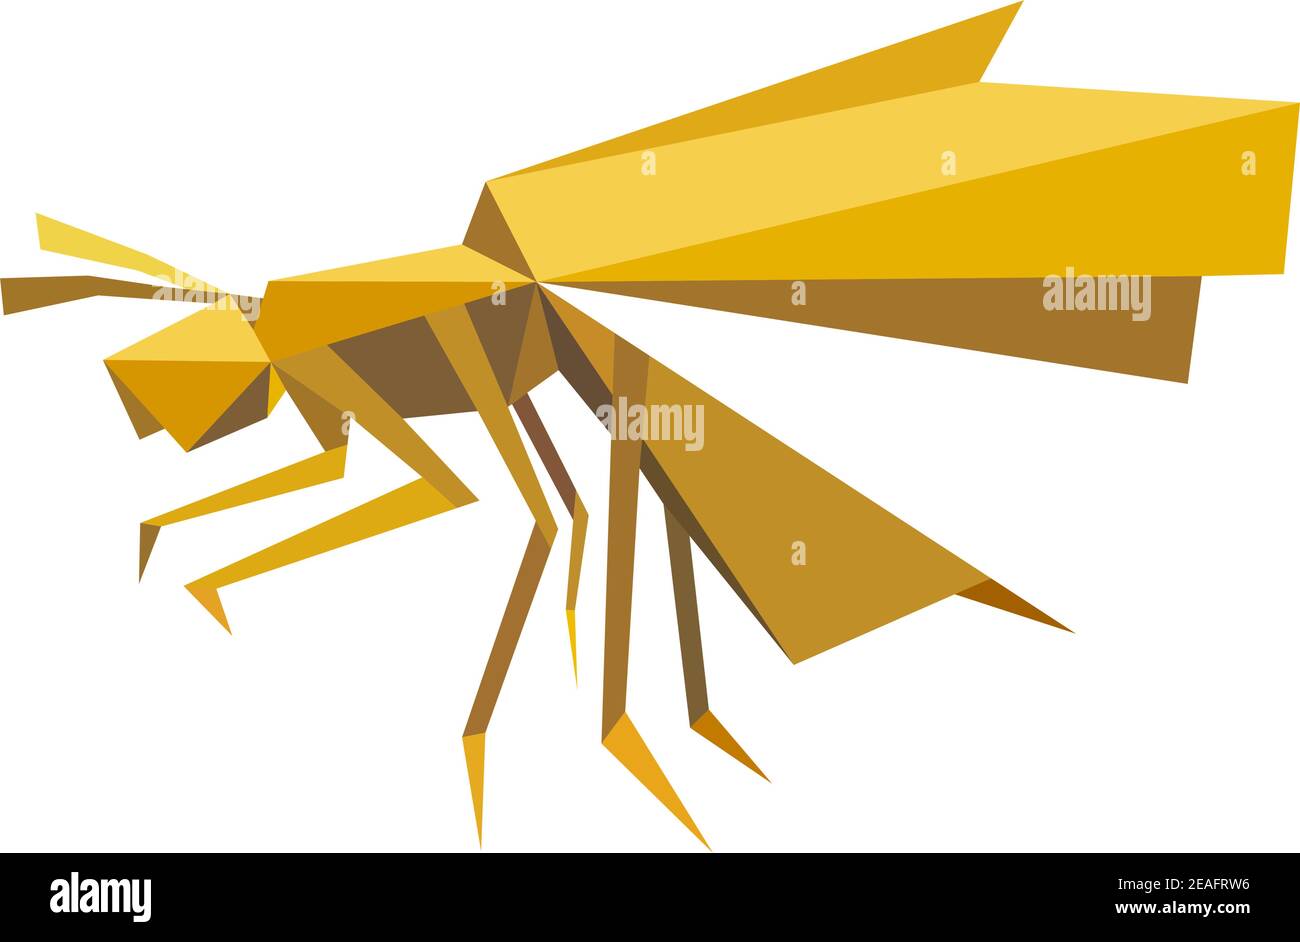 Flying bee insect in origami style composed of geometric elements and shapes with antennae, open wings and six legs in shades of brown isolated on whi Stock Vector